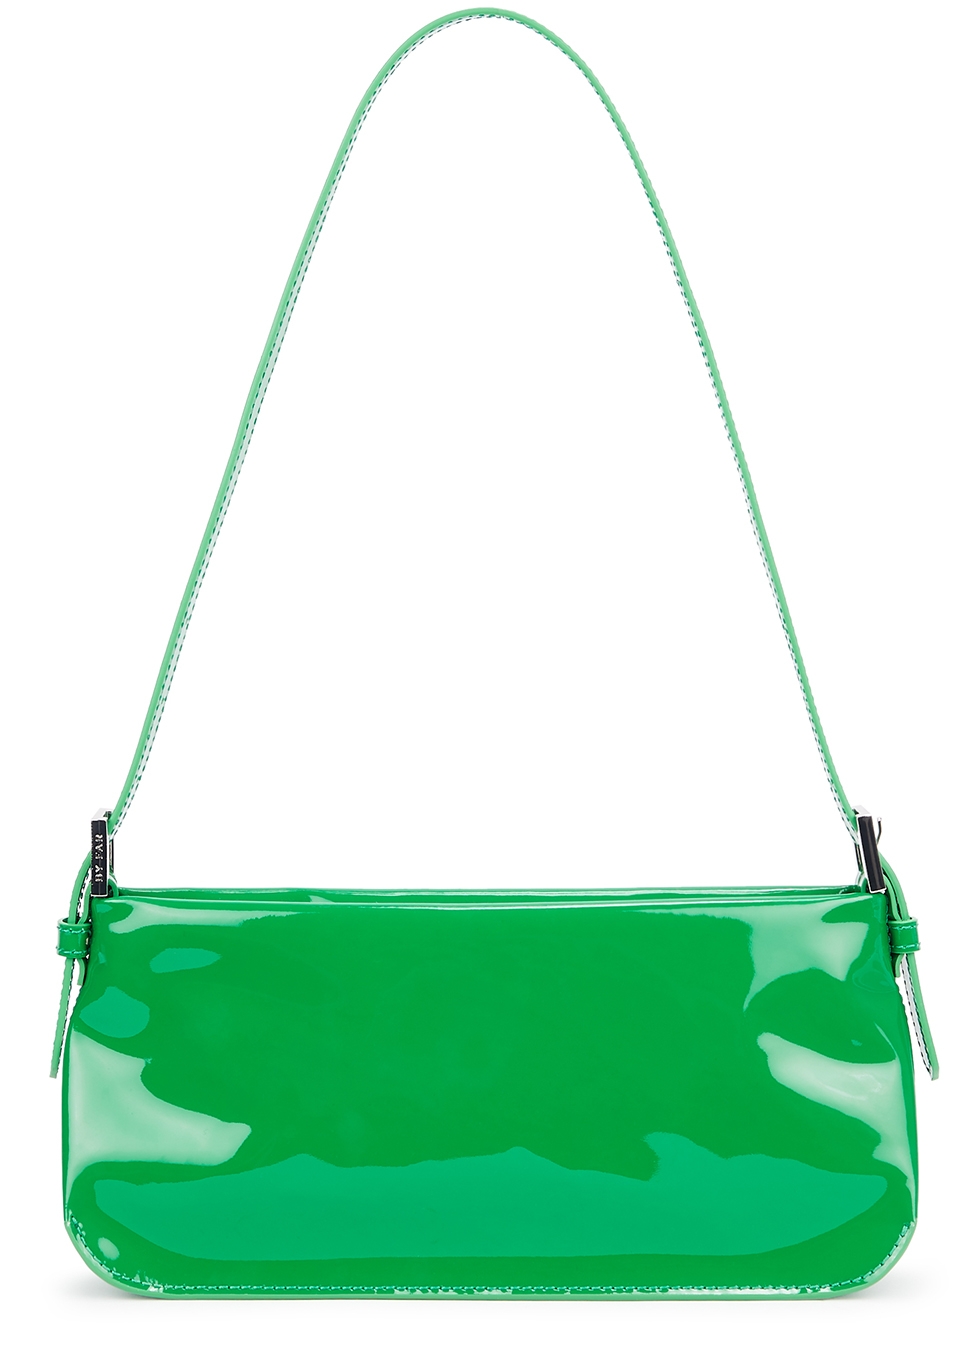 Dulce green glossed leather shoulder bag